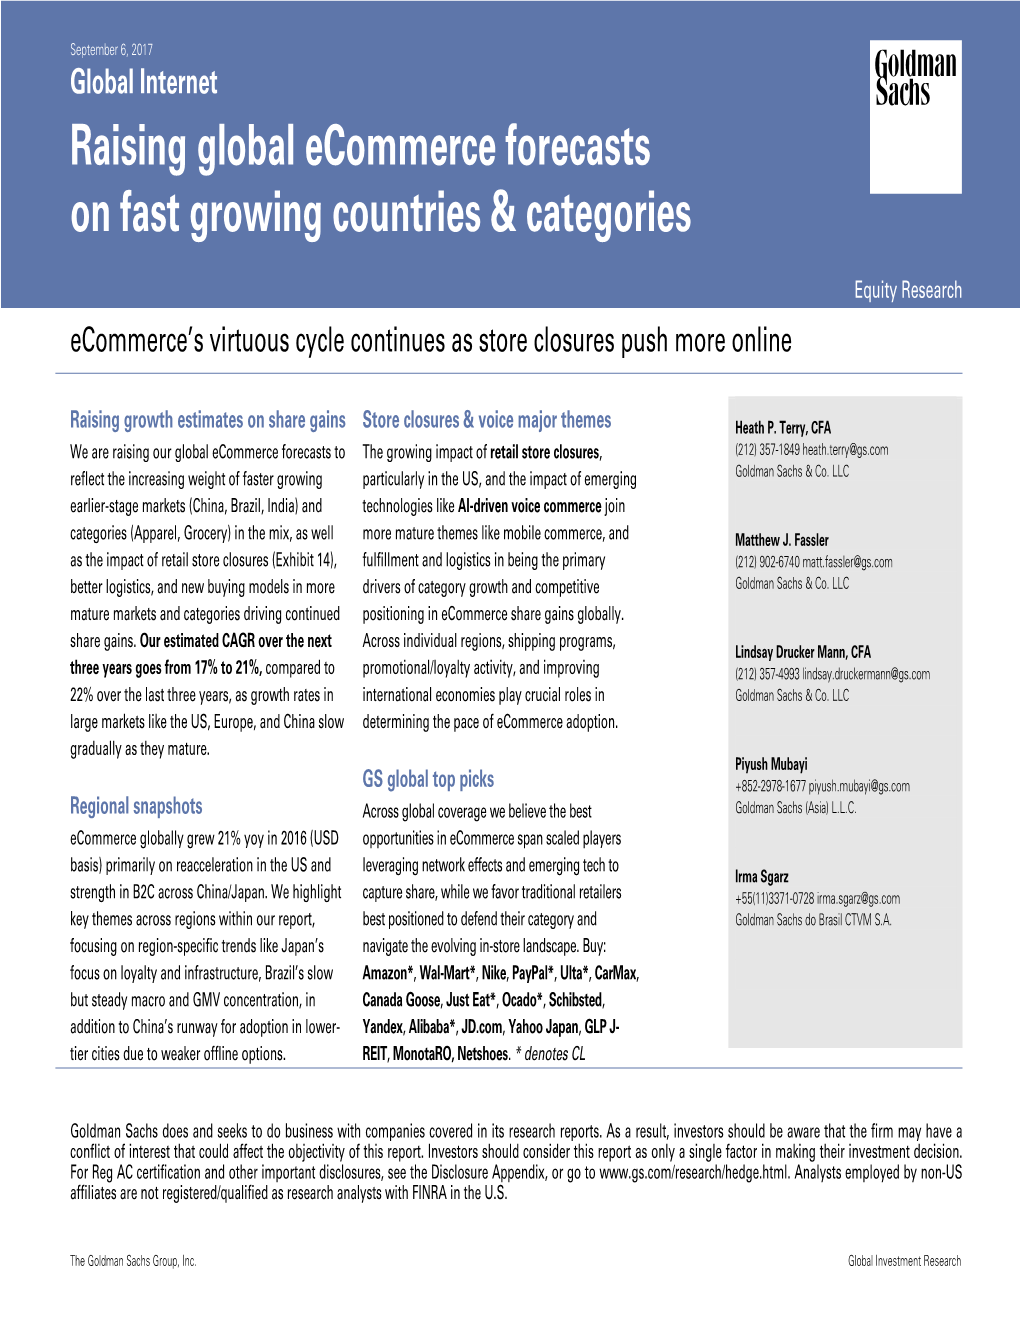 Raising Global Ecommerce Forecasts on Fast Growing Countries & Categories